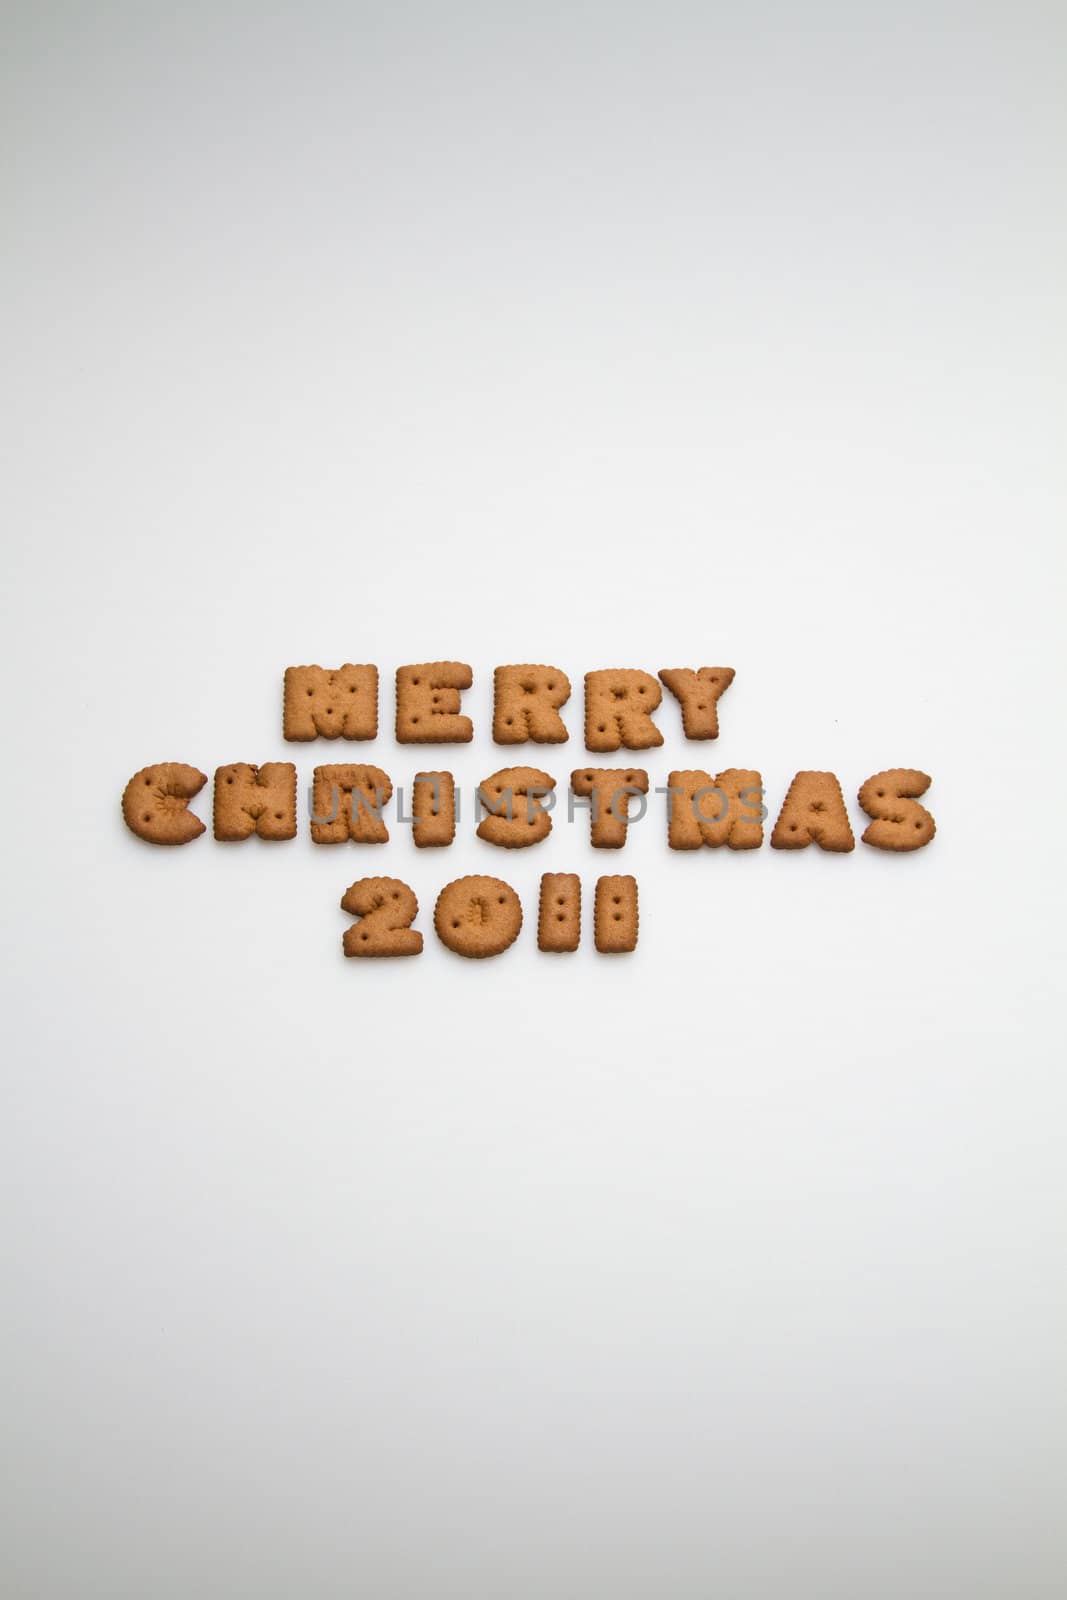 Merry Christmas 2011 wording from brown biscuits at center frame on white background  in portrait orientation